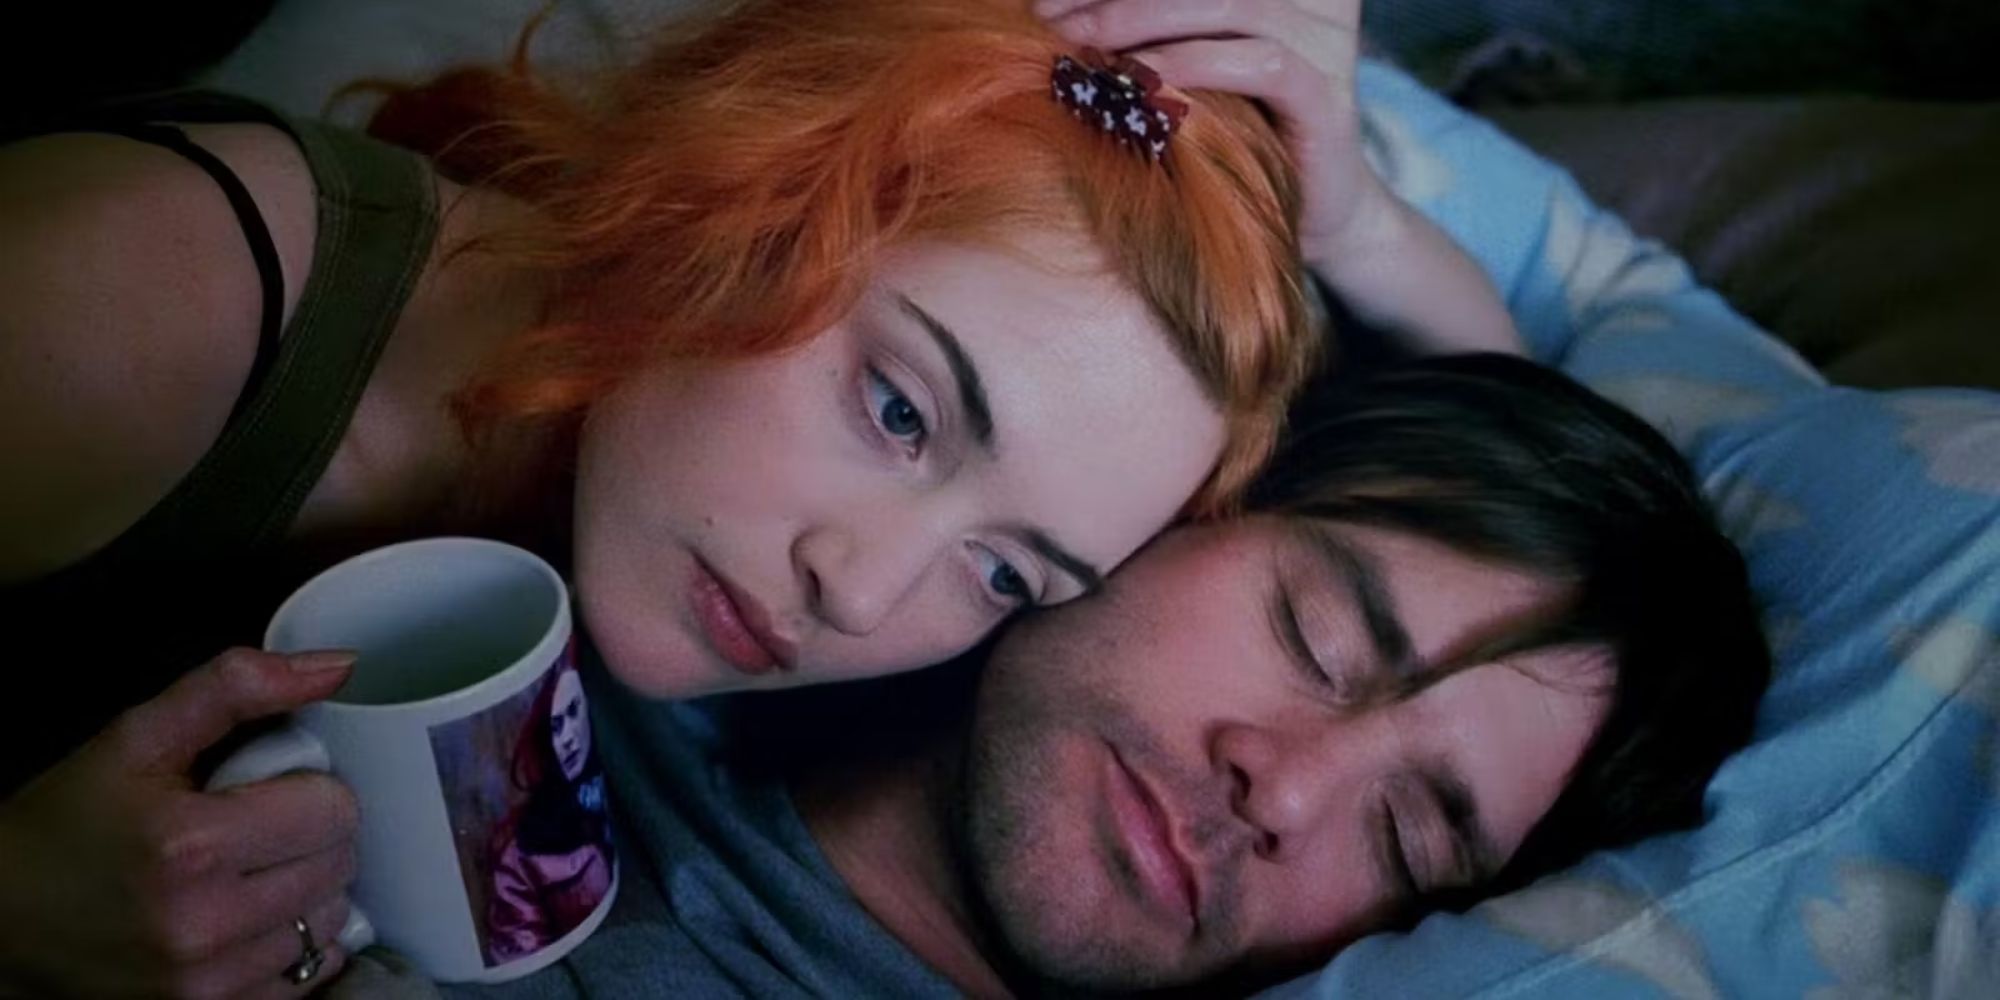 Clementine and Joel in bed together in Eternal Sunshine of the Spotless Mind